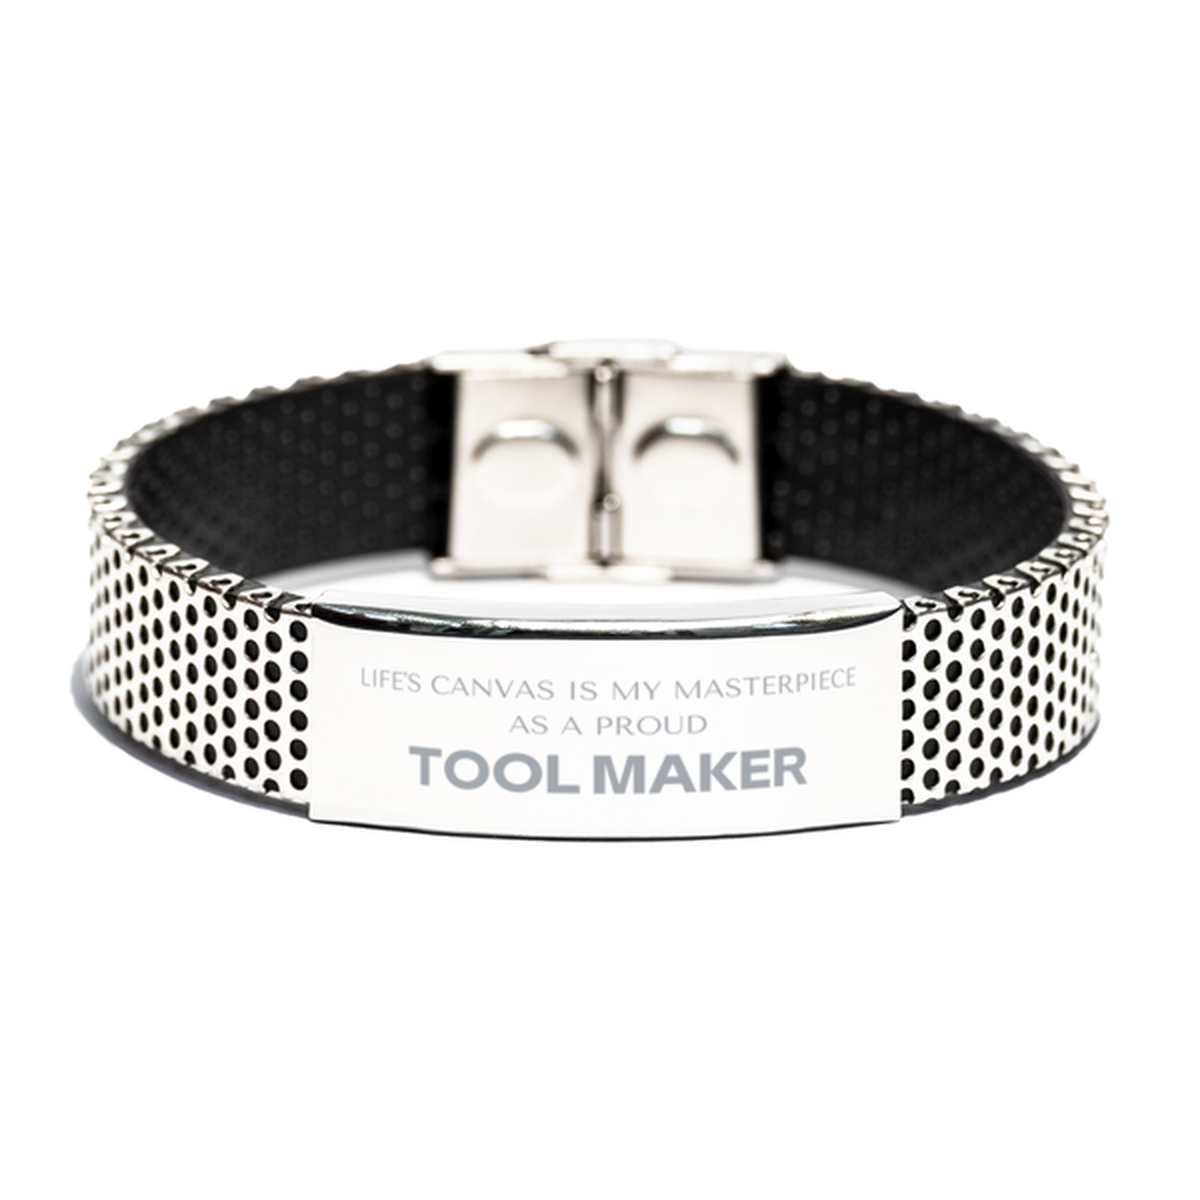 Proud Tool Maker Gifts, Life's canvas is my masterpiece, Epic Birthday Christmas Unique Stainless Steel Bracelet For Tool Maker, Coworkers, Men, Women, Friends